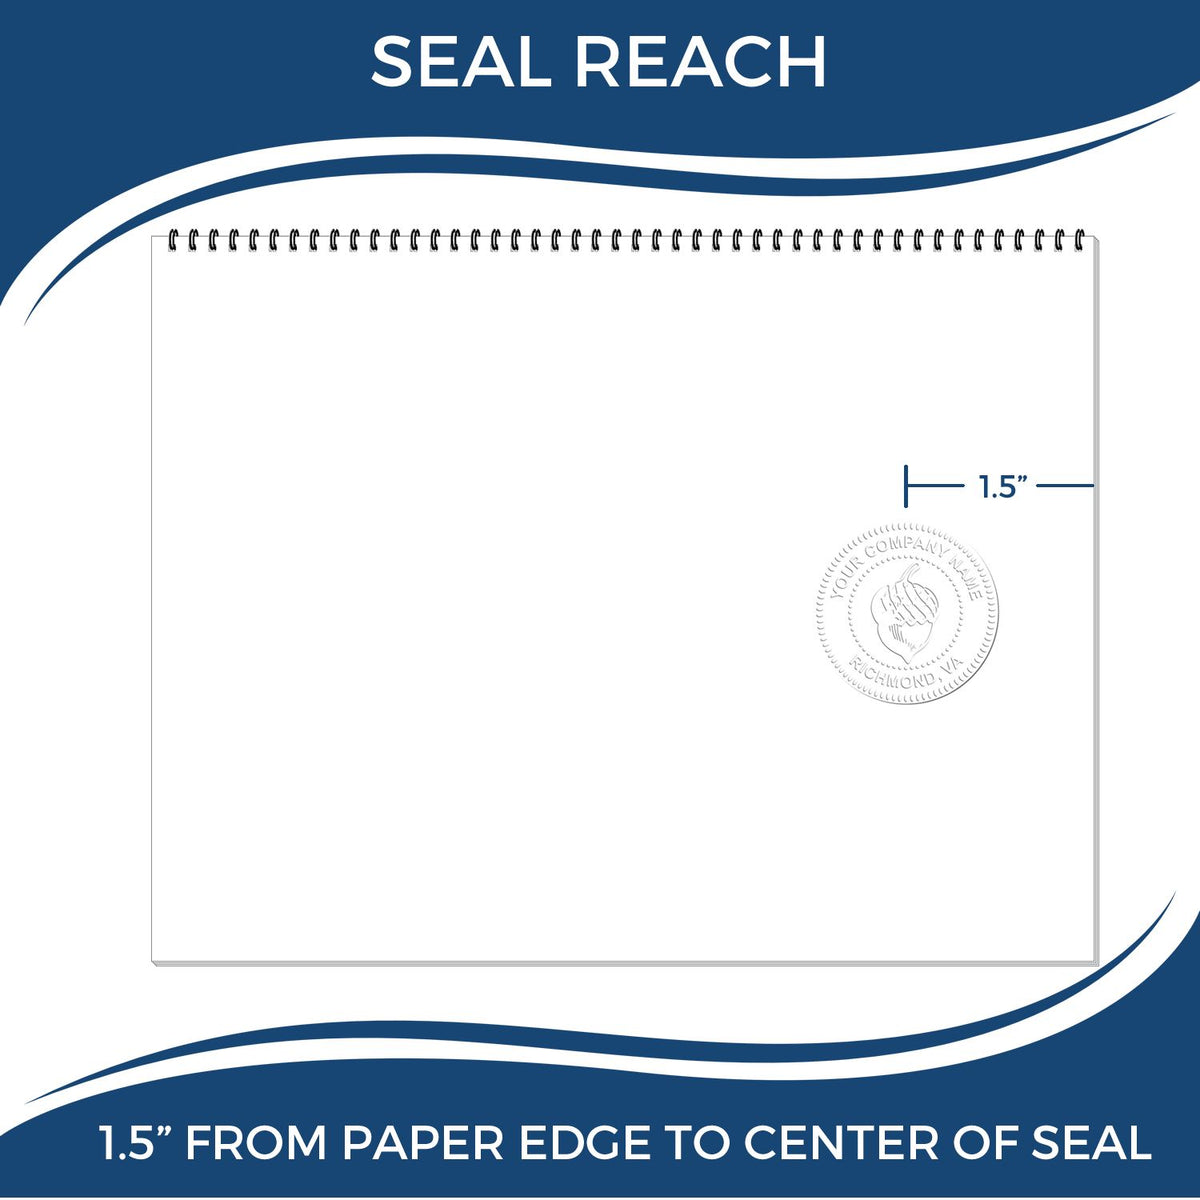 An infographic showing the seal reach which is represented by a ruler and a miniature seal image of the Hybrid Delaware Architect Seal